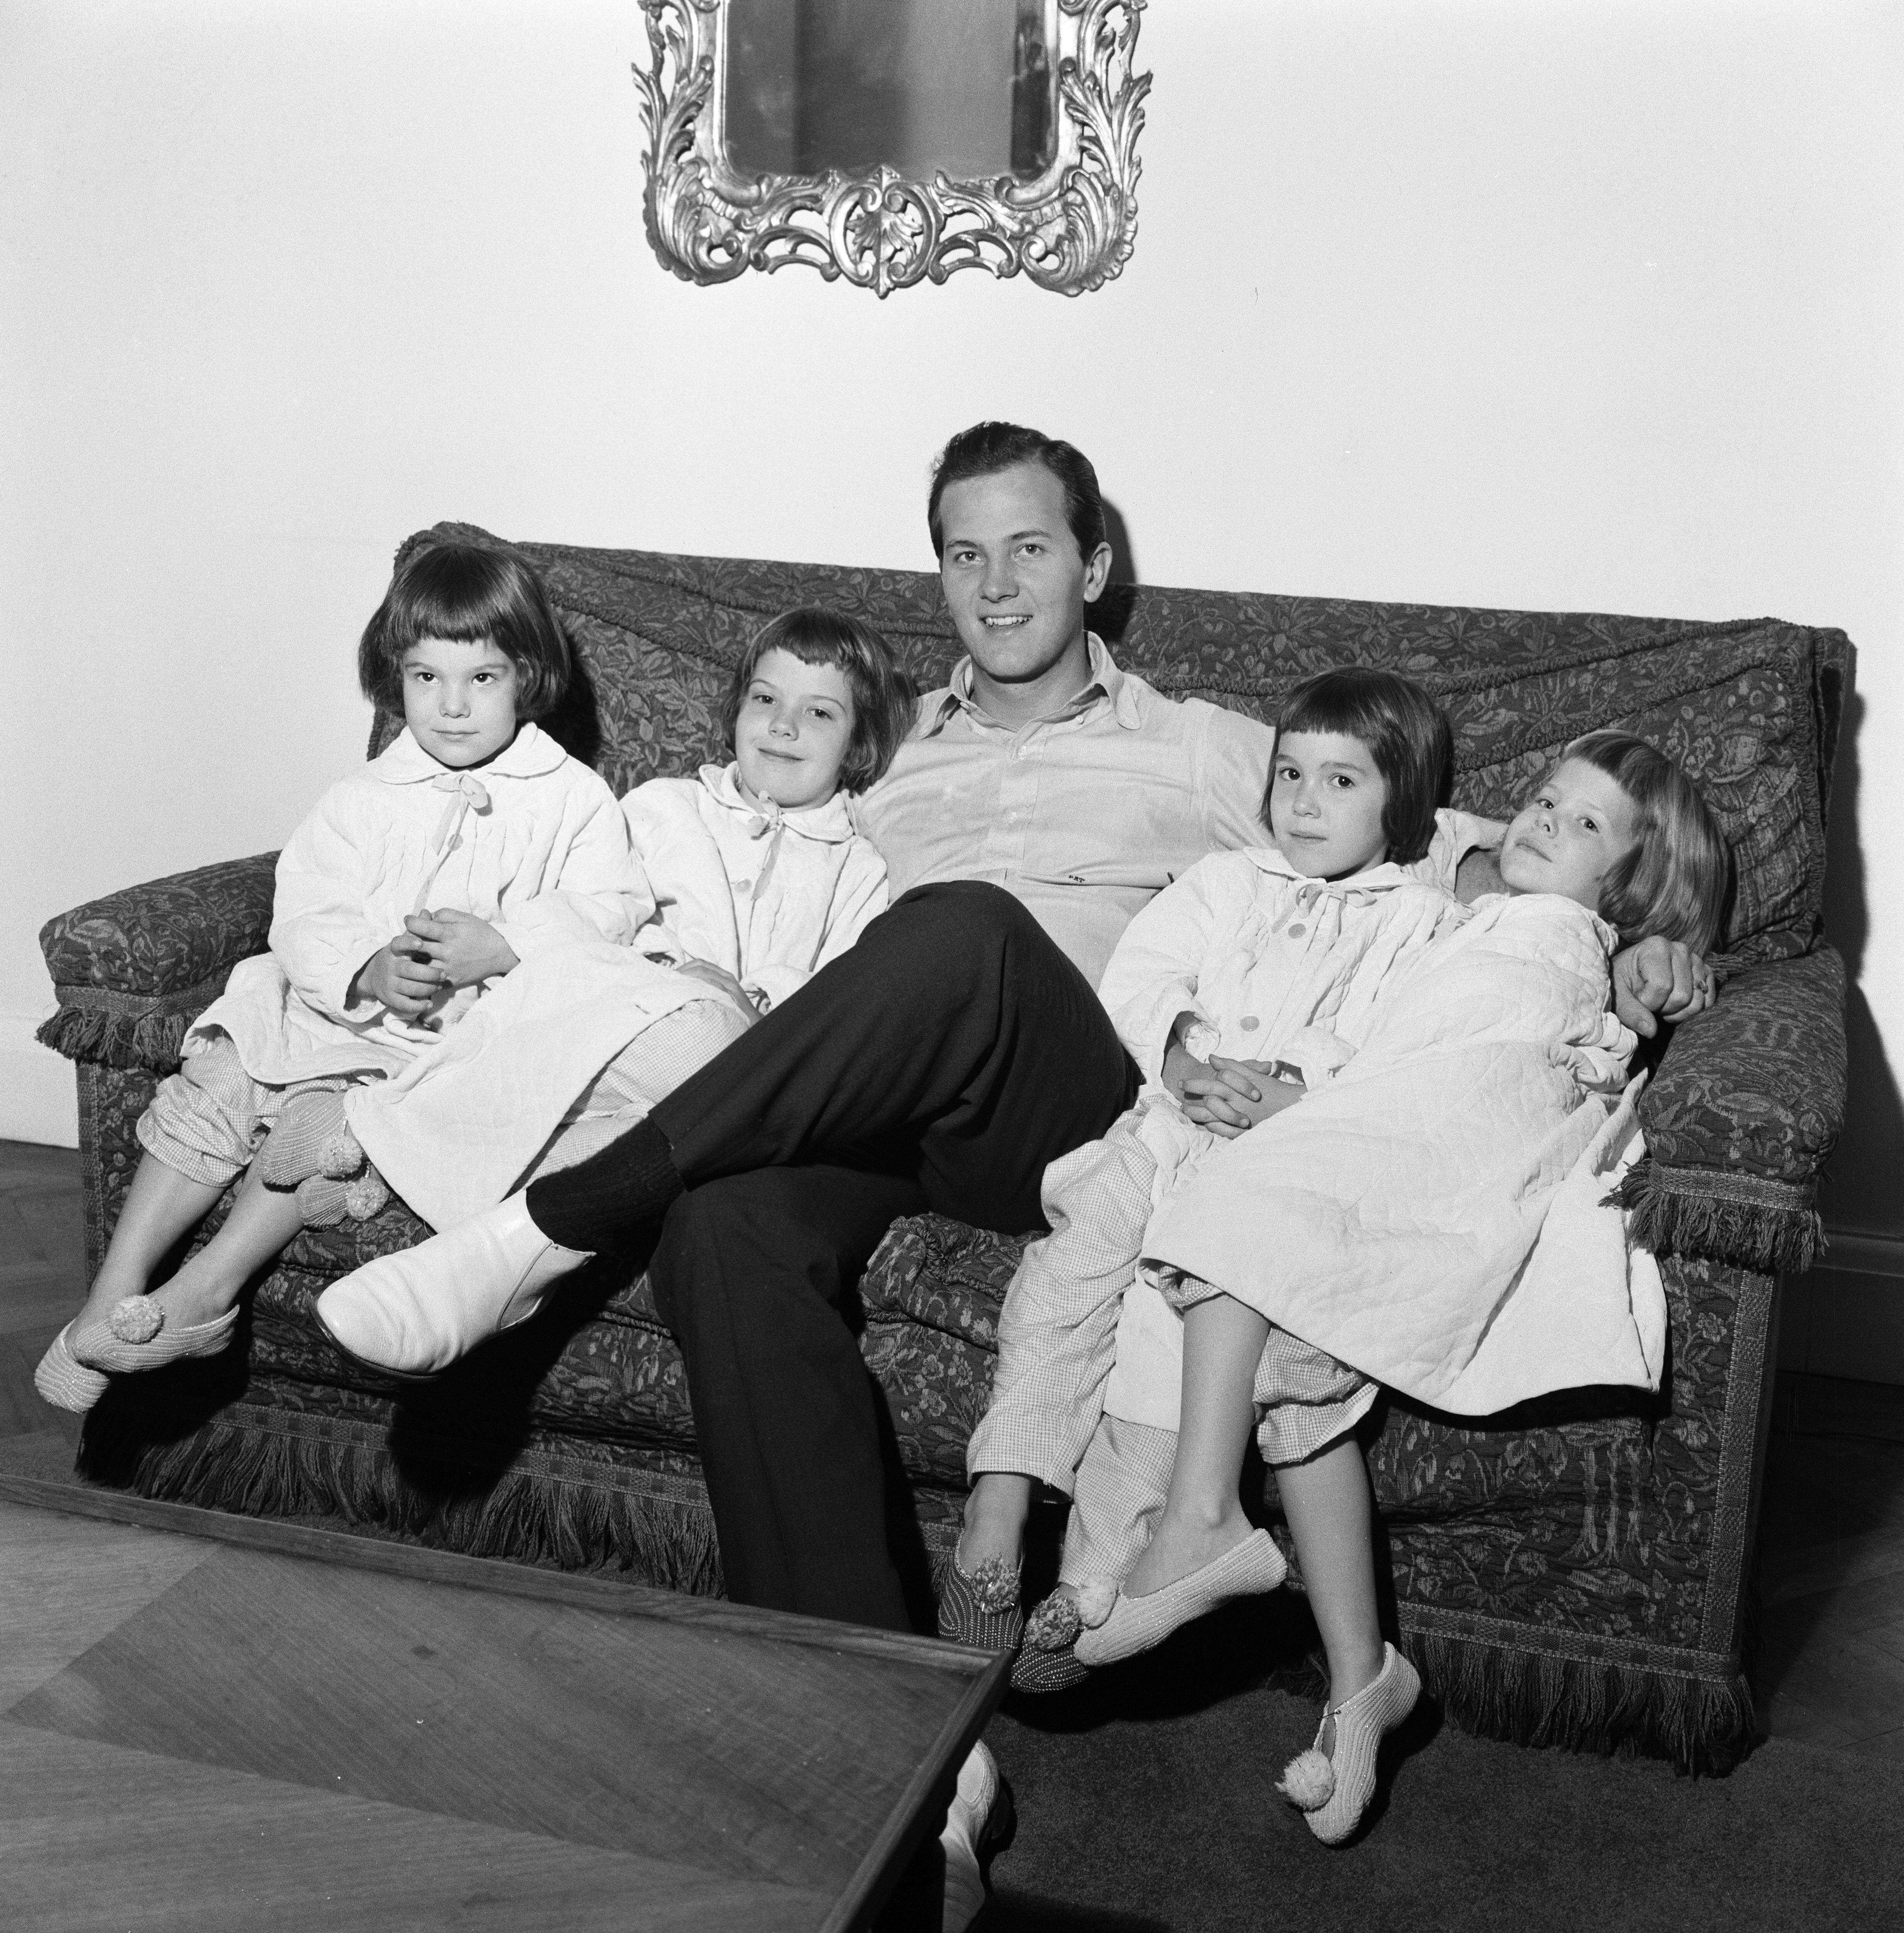 Pat Boone in London with his four daughters, Cherry, Laury, Lindy, and Debby, on January 24, 1962. | Source: Getty Images